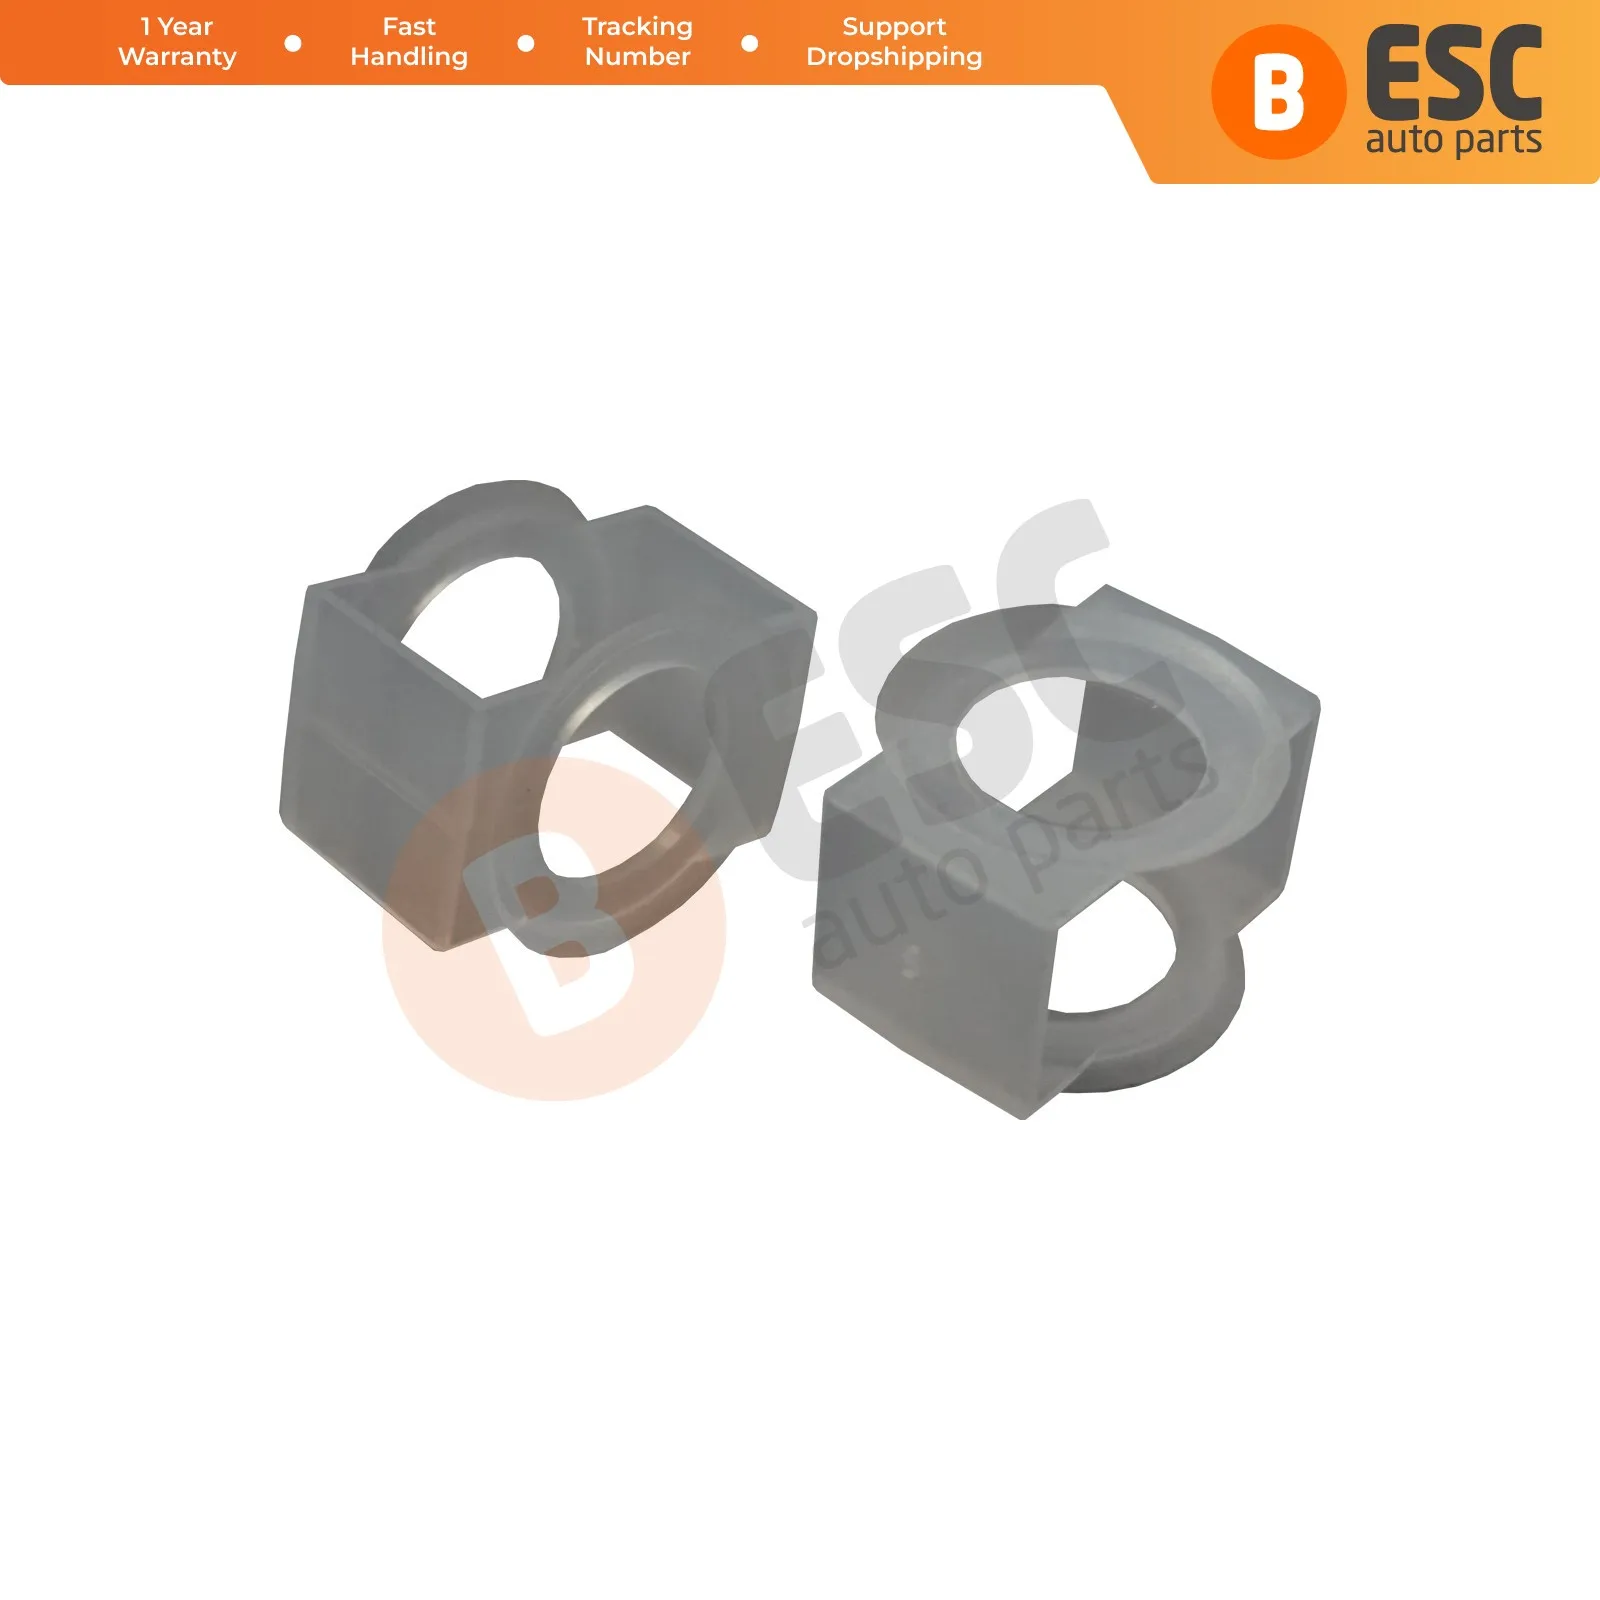 

ESC Auto Parts ESP653 2 Pieces Gear Linkage Selector 107700743133 Part for Renault Fast Shipment Free Shipment Ship From Turkey